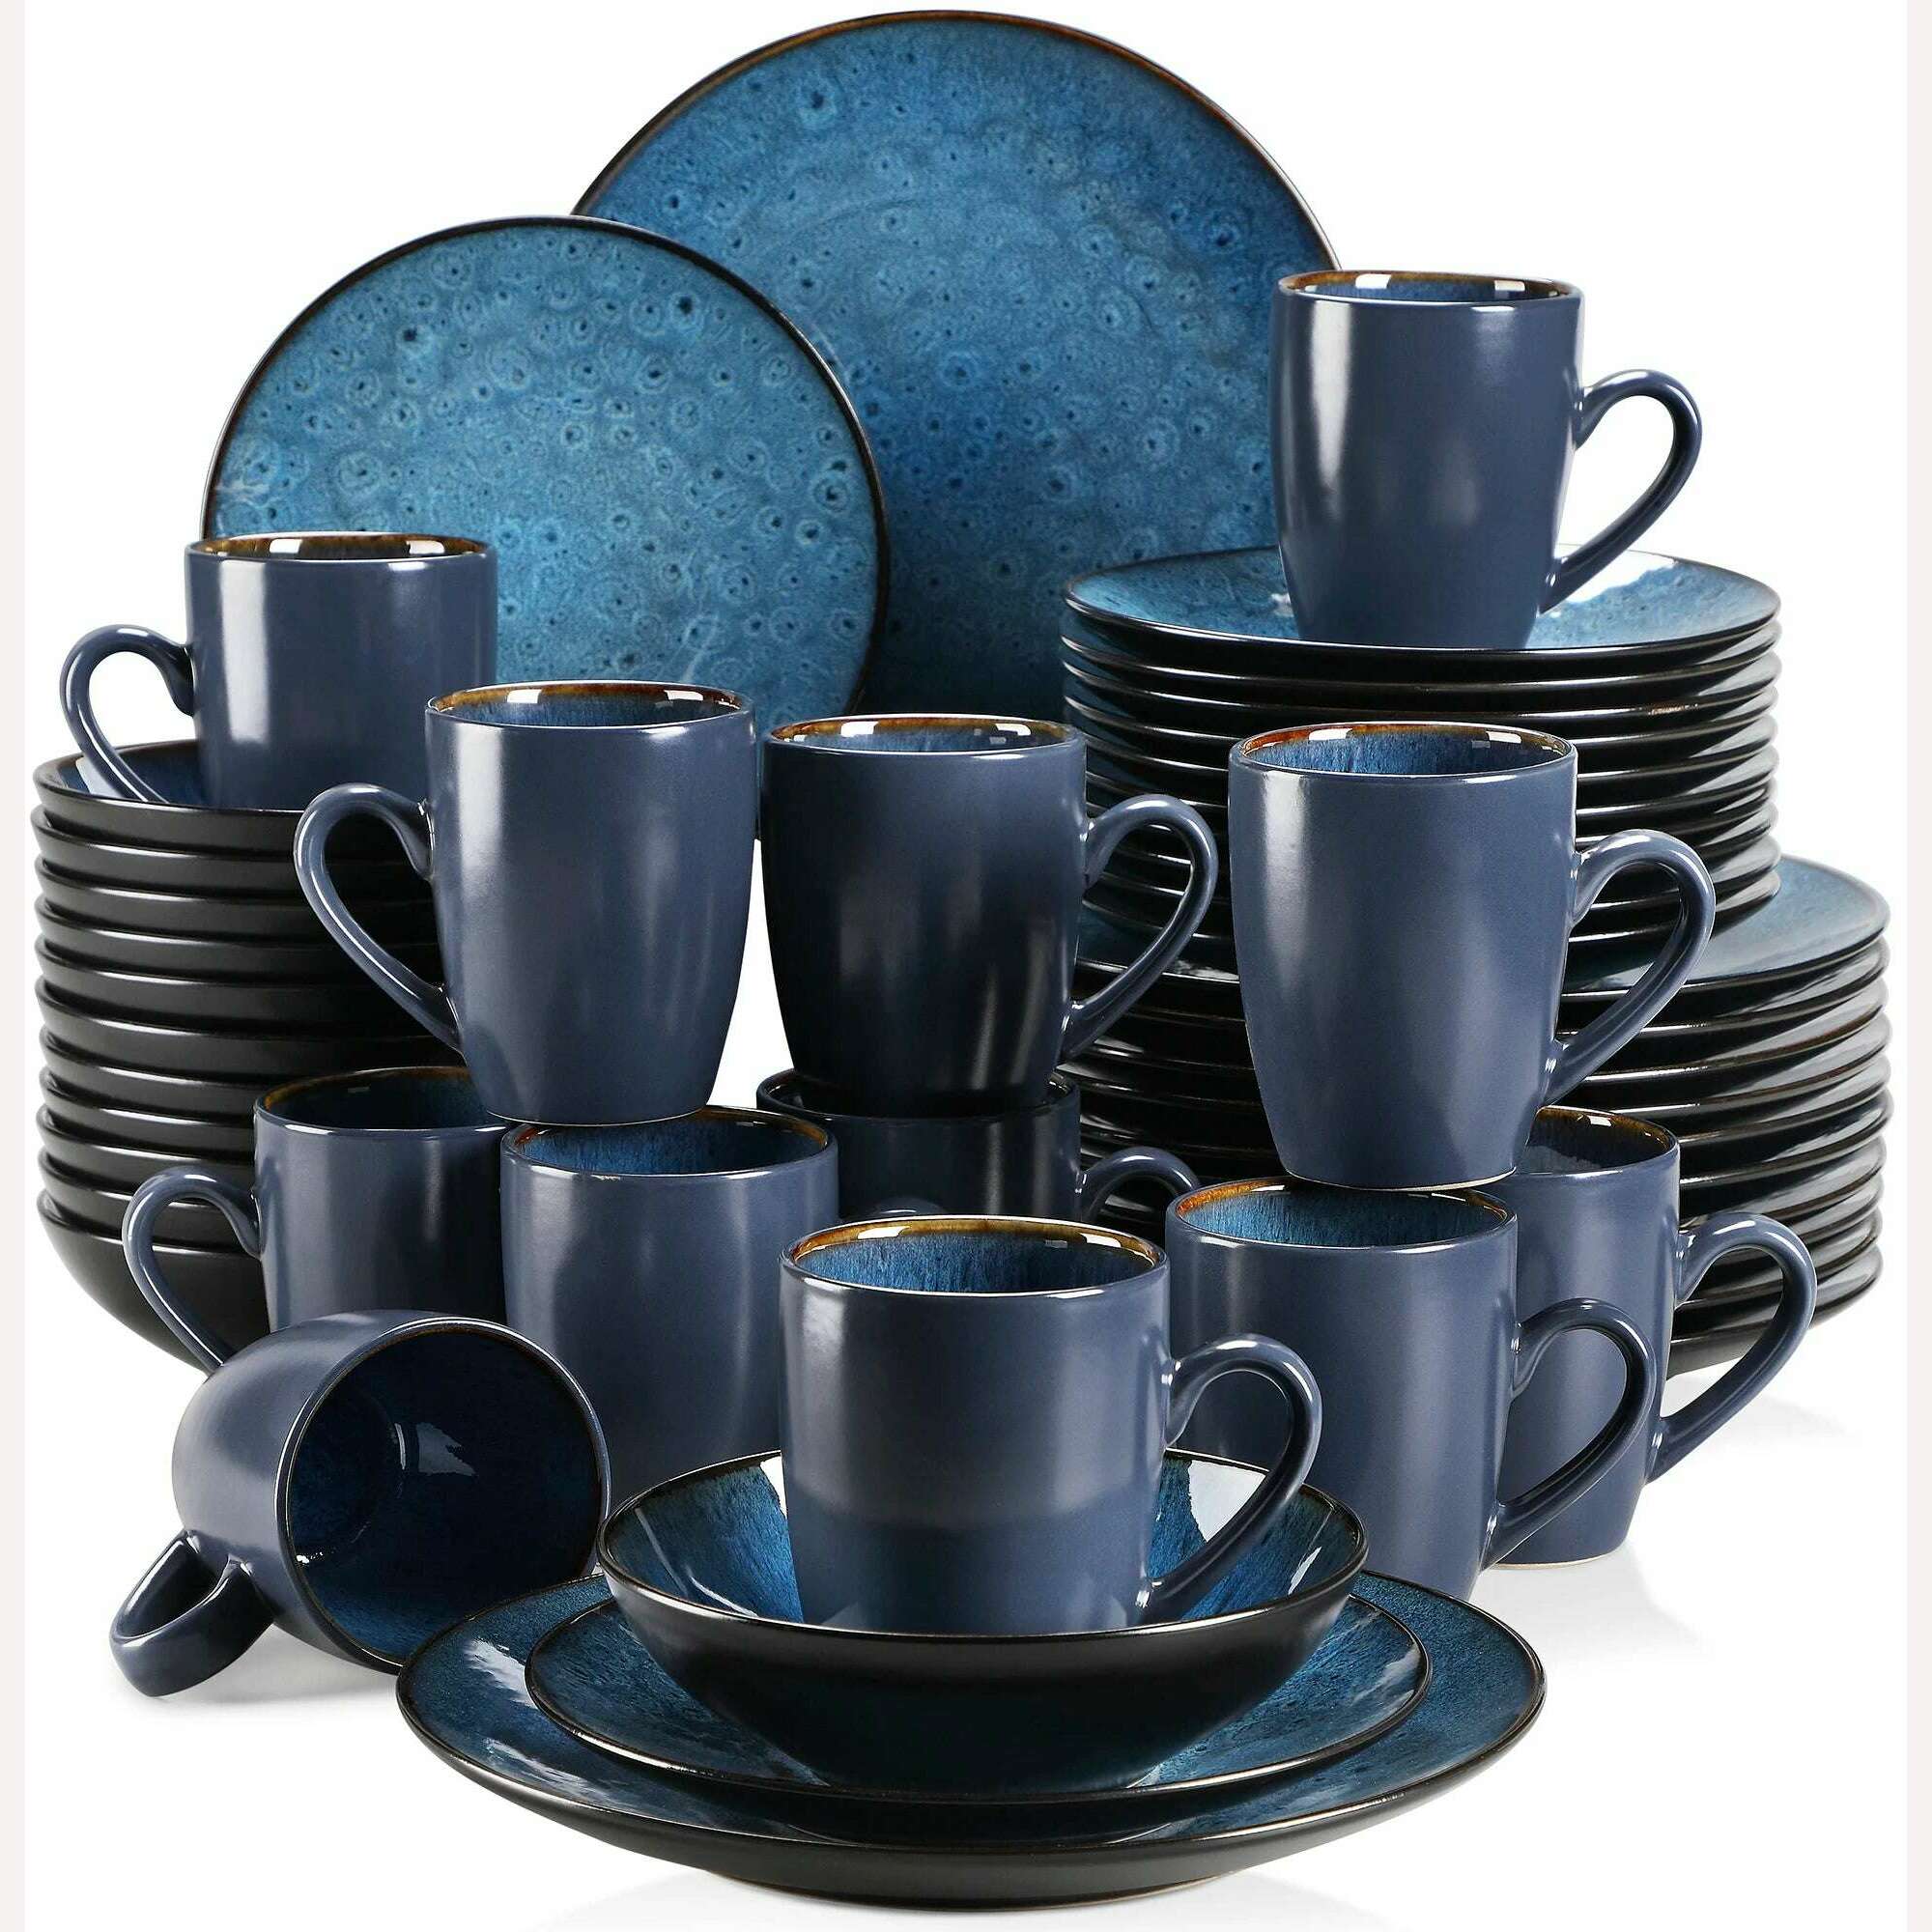 KIMLUD, VANCASSO BUBBLE 16/32/48-Piece Tableware Set Vintage Ceramic Blue/Brown Stoneware Set with Dinner&Dessert Plate,Bowl,Coffee Cups, Blue-48-Piece / United States, KIMLUD Womens Clothes